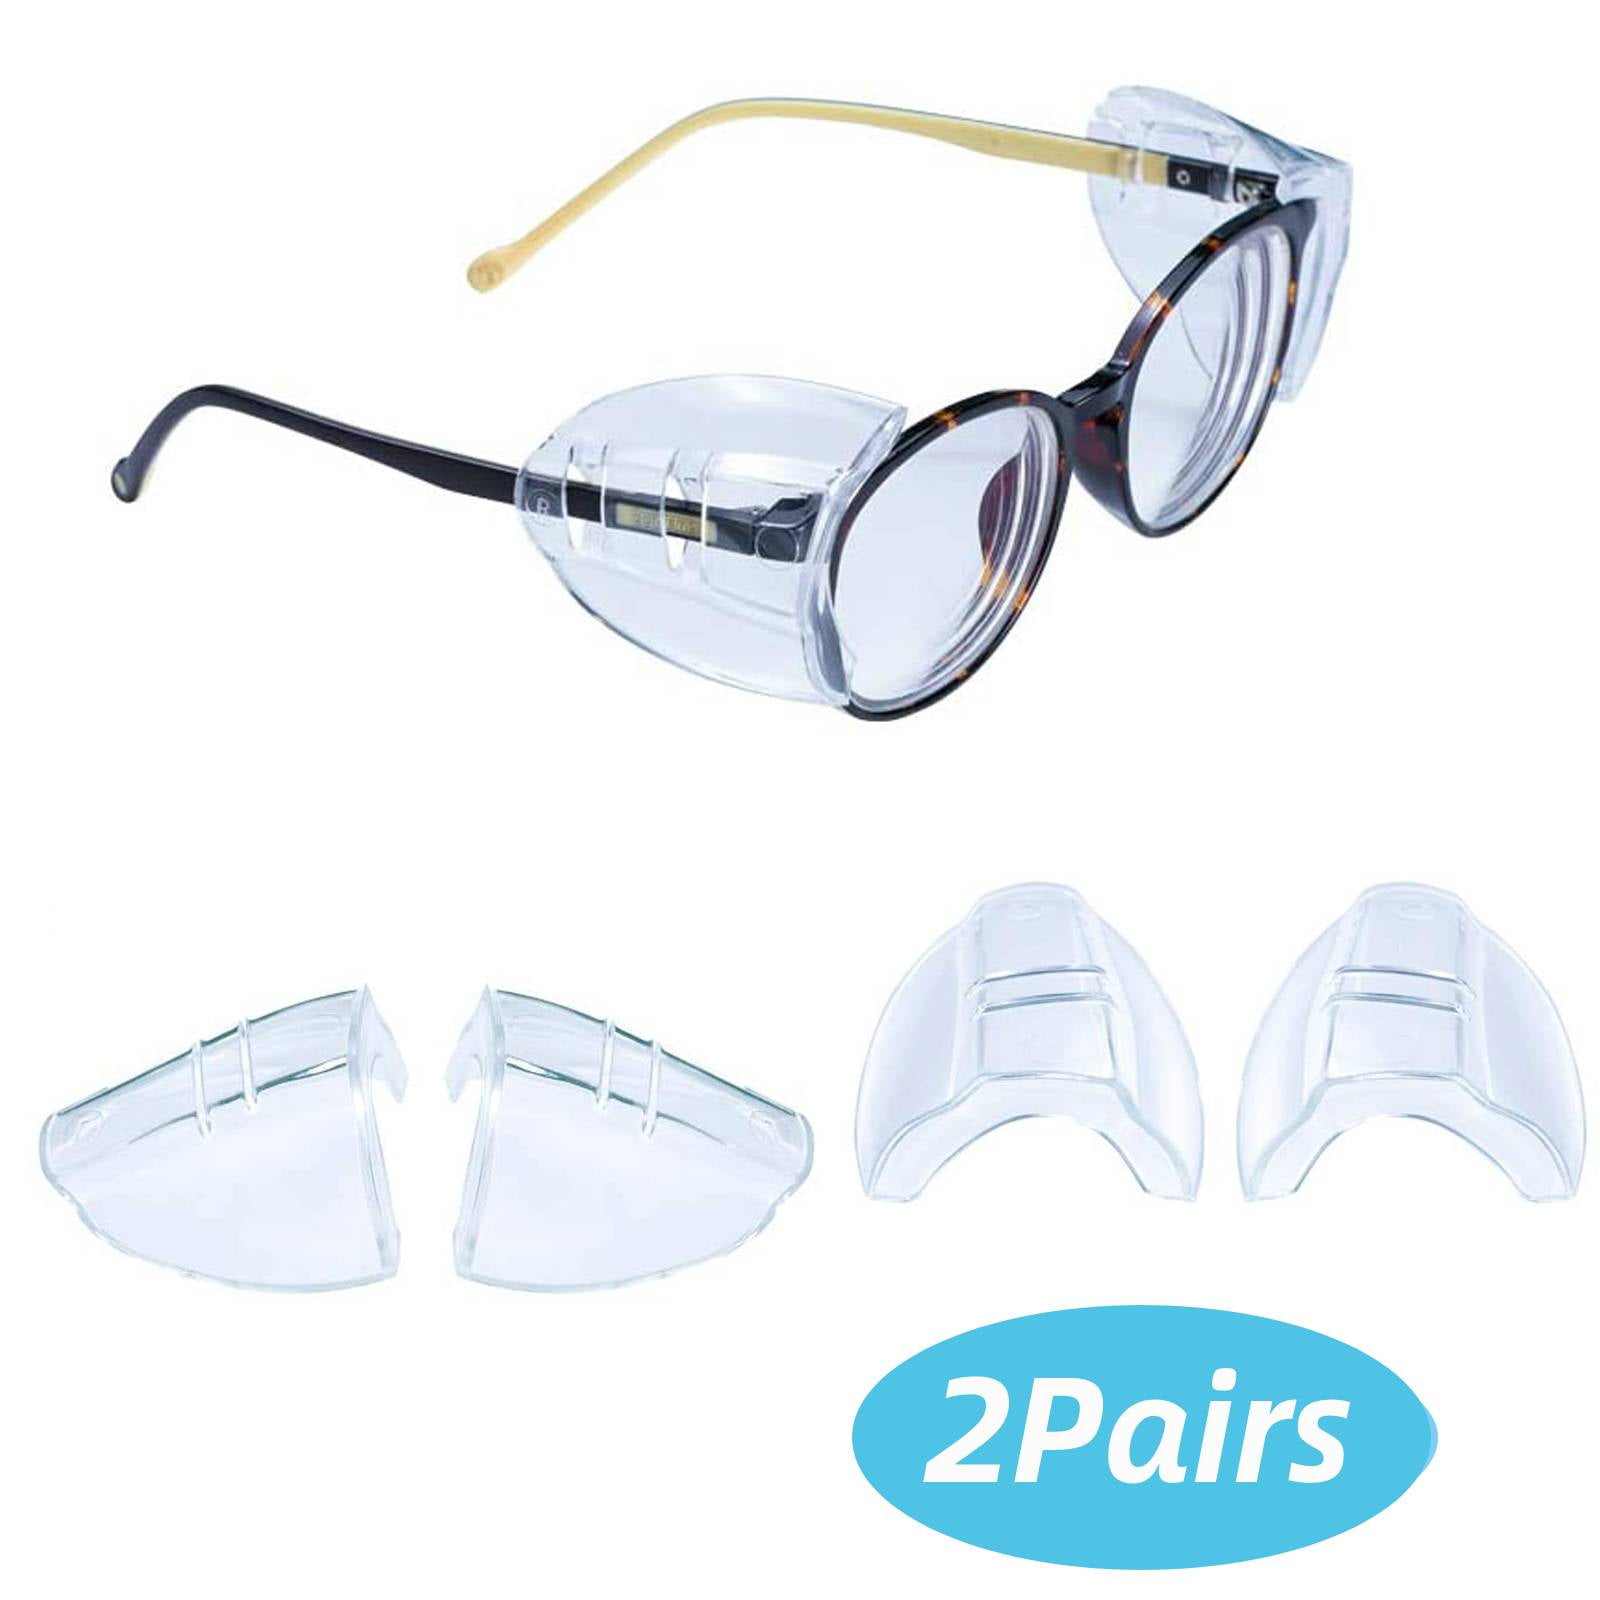 3 Pair/Pack Gateway AT7 Spec Side Shields Clear For Safety Glasses Slip On Z87+ 